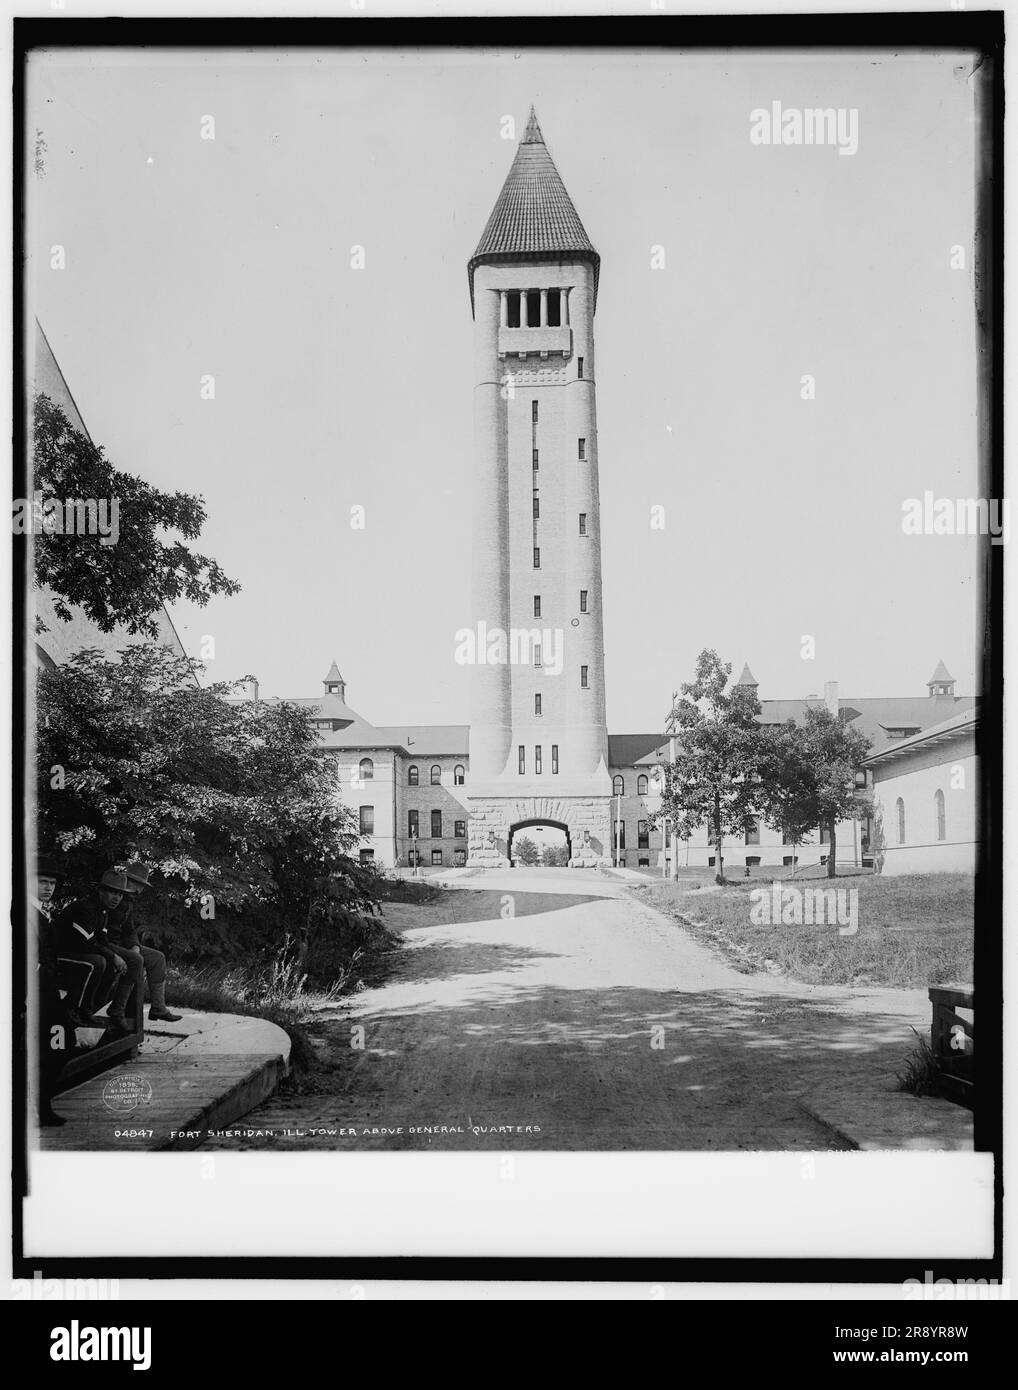 Fort Sheridan, Ill., tower above general quarters, c1898. Stock Photo